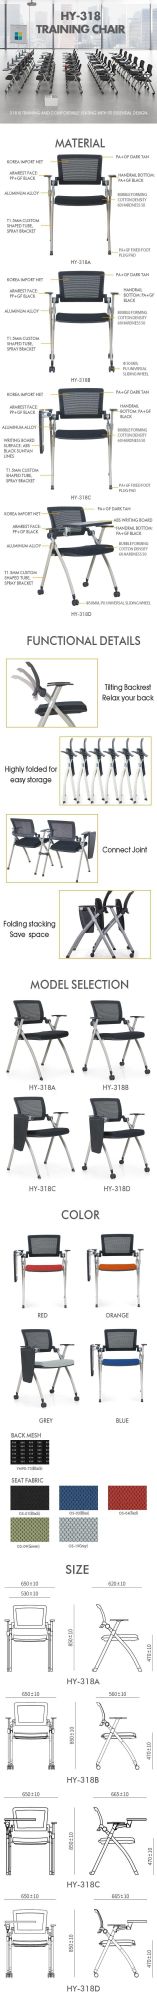 Modern Mesh Back Staff School Multifunctional Chair with Arm